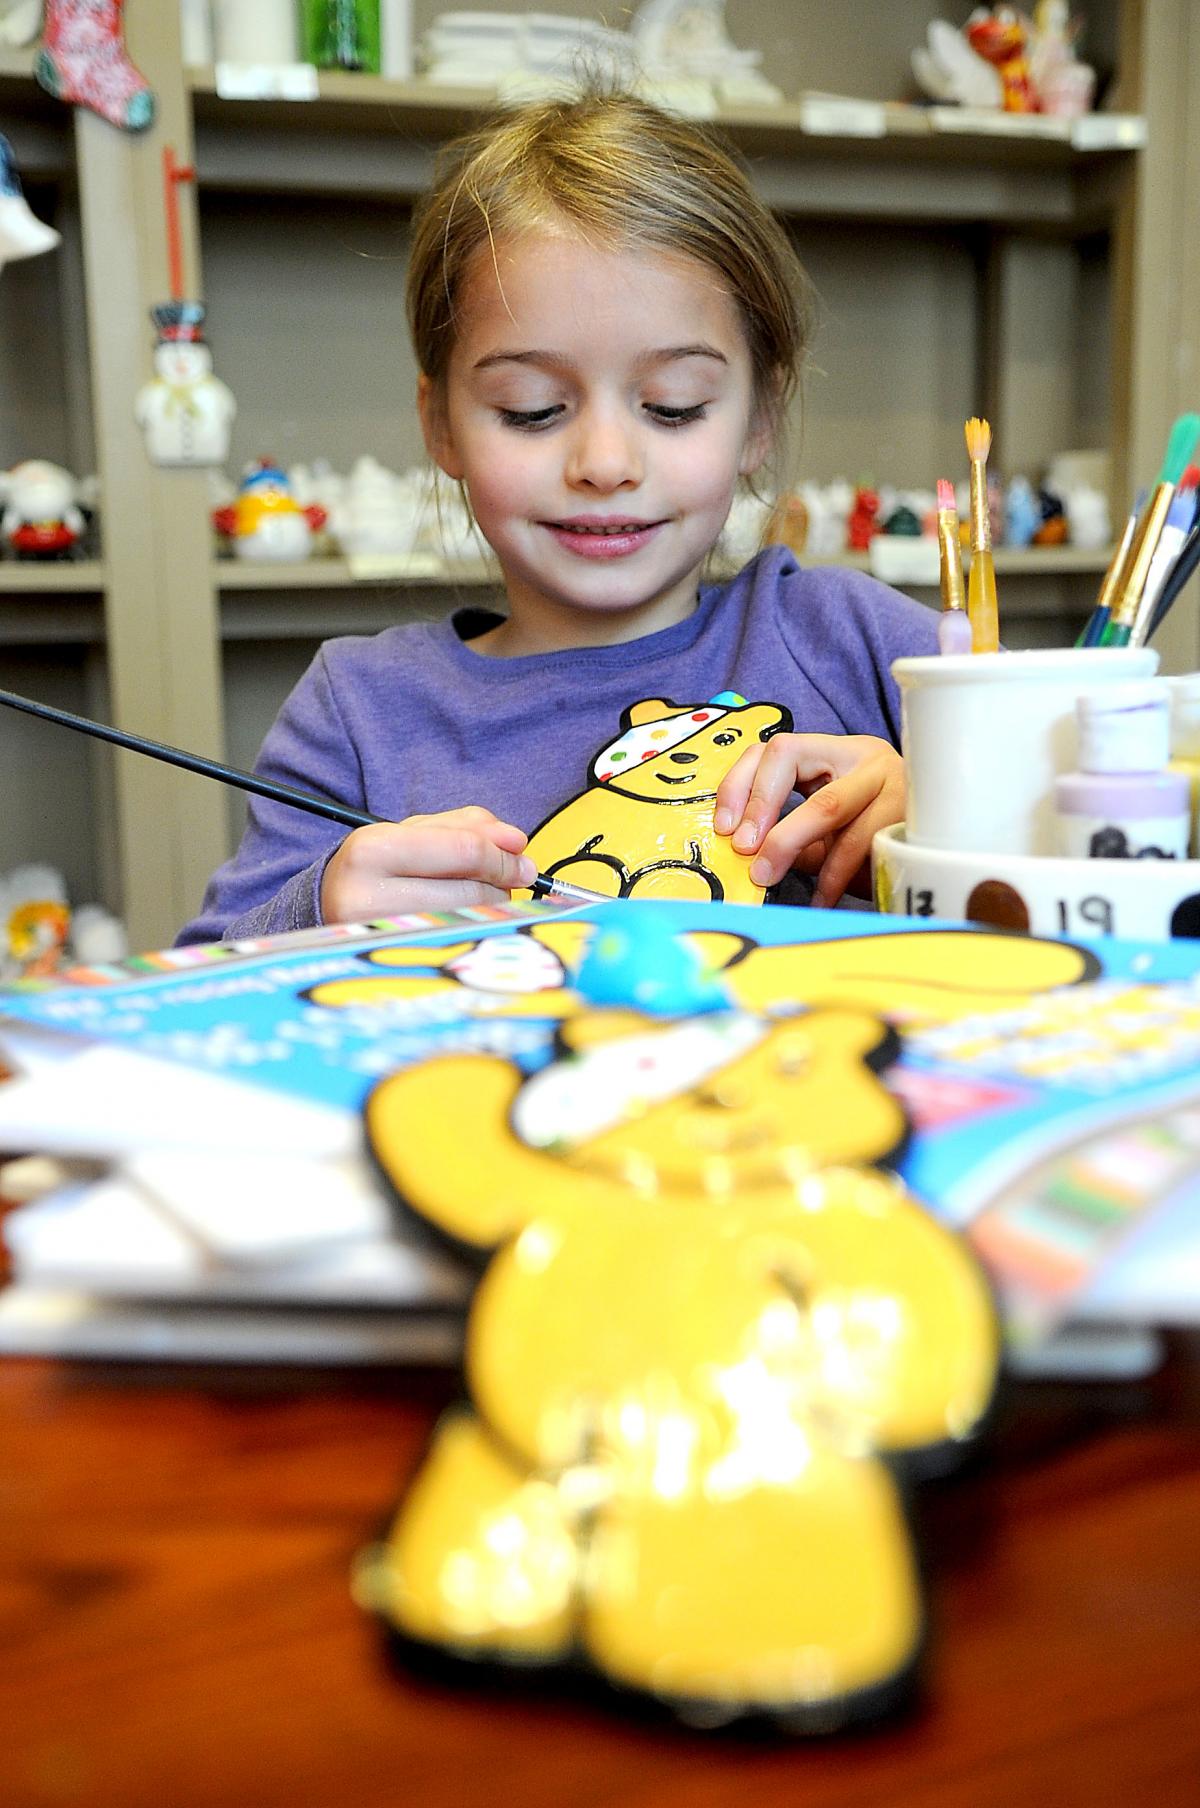 Lucy Allen, 6, painting her ceramic Pudsey Bear